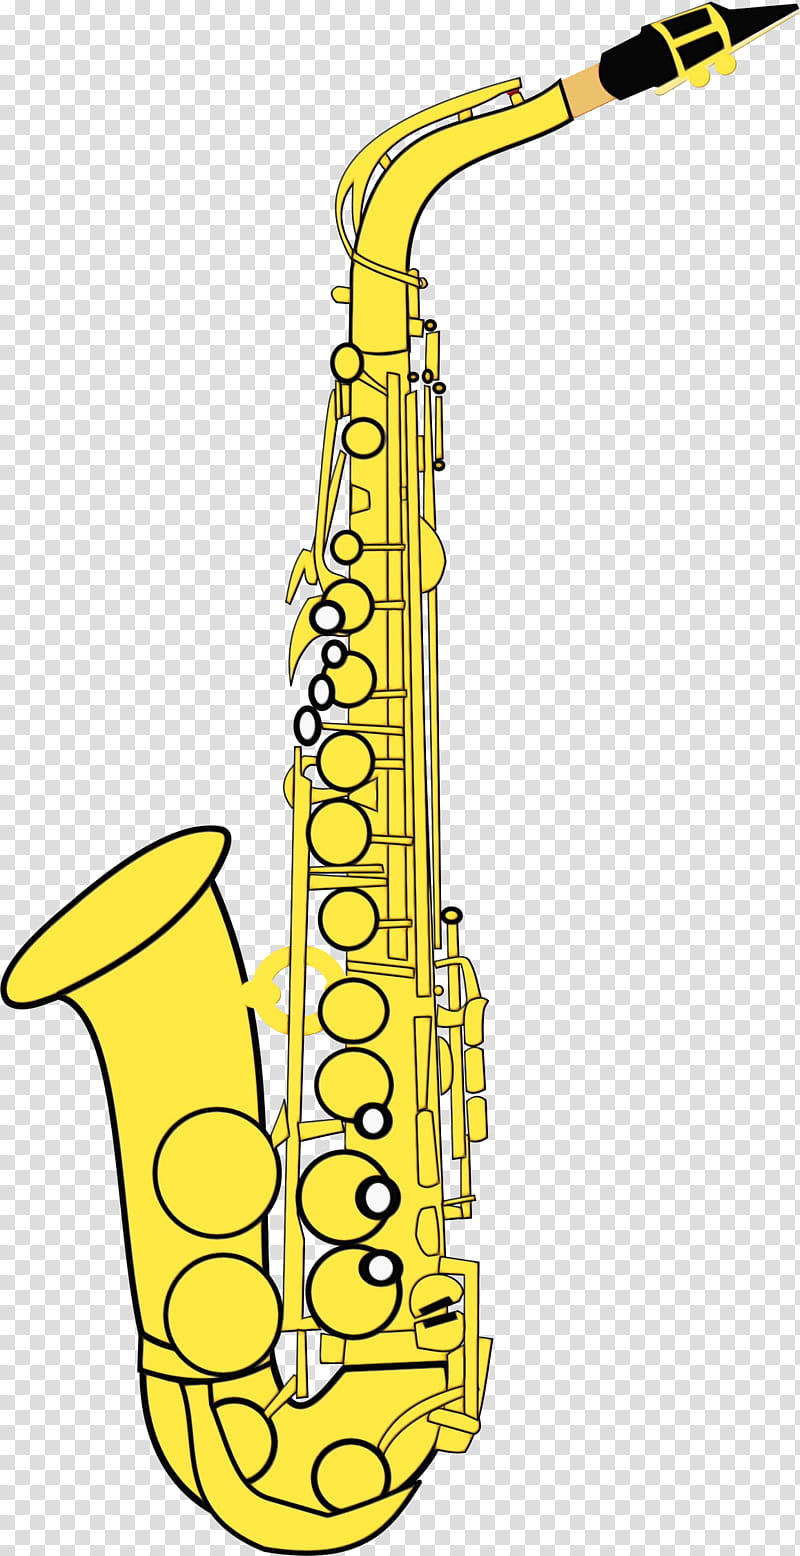 clarinet family saxophone woodwind instrument musical instrument reed instrument, Watercolor, Paint, Wet Ink, Bass Oboe, Pipe, Indian Musical Instruments transparent background PNG clipart